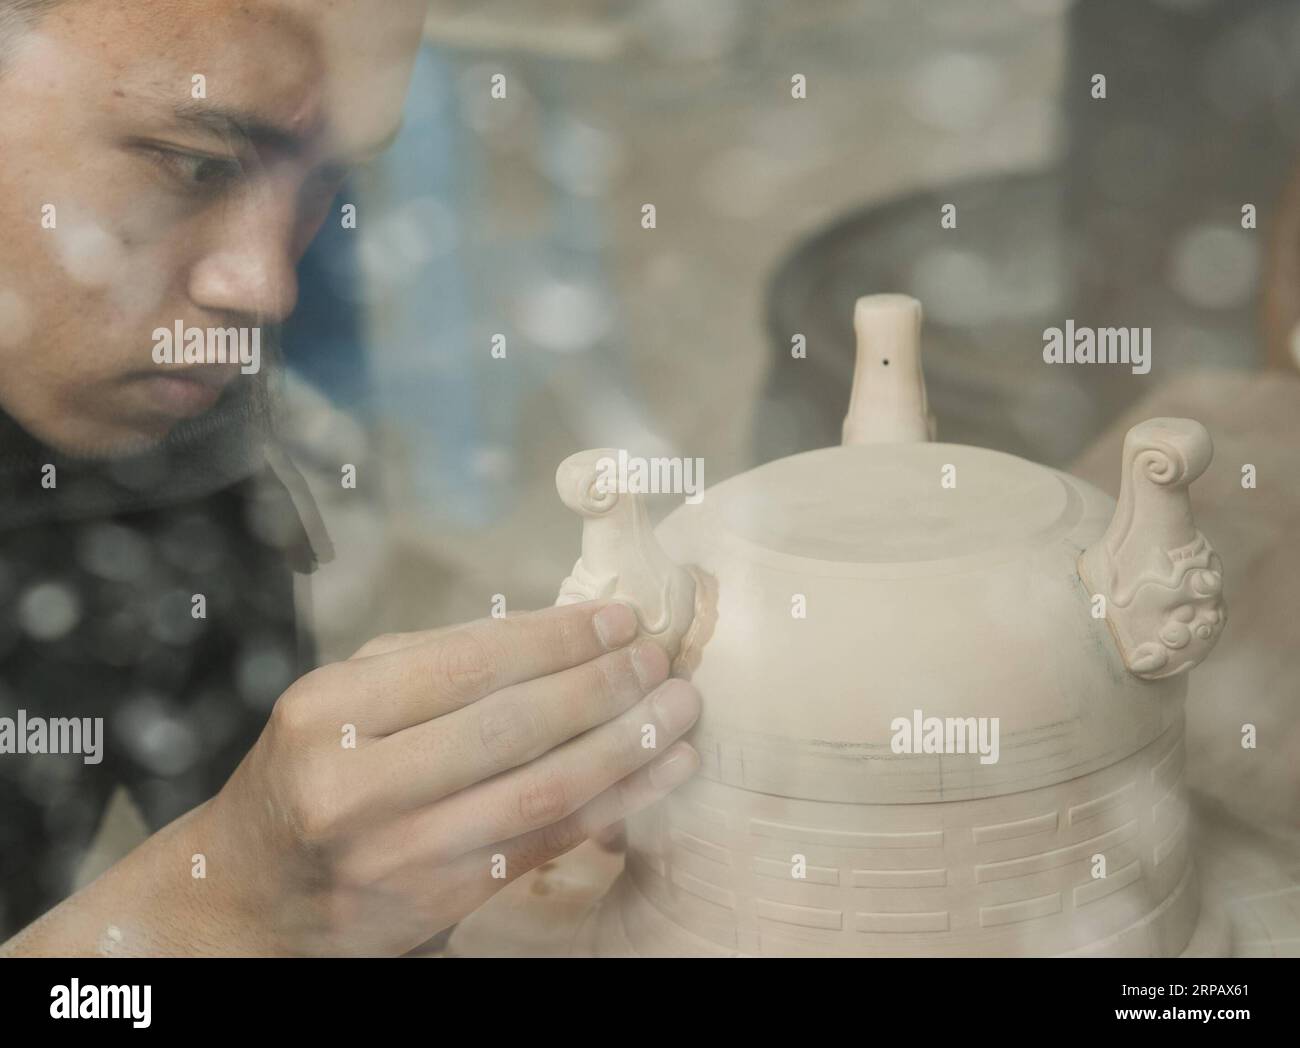 (190520) -- LONGQUAN, May 20, 2019 (Xinhua) -- Lin Song works on the clay base for a celadon incense burner at his studio in Longquan, east China s Zhejiang Province, May 20, 2019. Born in 1993, Lin Song is a native of Longquan, home to China s best celadon wares. He received professional training in both his hometown and Jingdezhen, another important porcelain hub of China. Lin had also followed other celadon artisans for years before setting up a studio back home in 2014, focusing on the replication of classical celadon incense burners. Lin s personal collection has grown to over 40 celadon Stock Photo